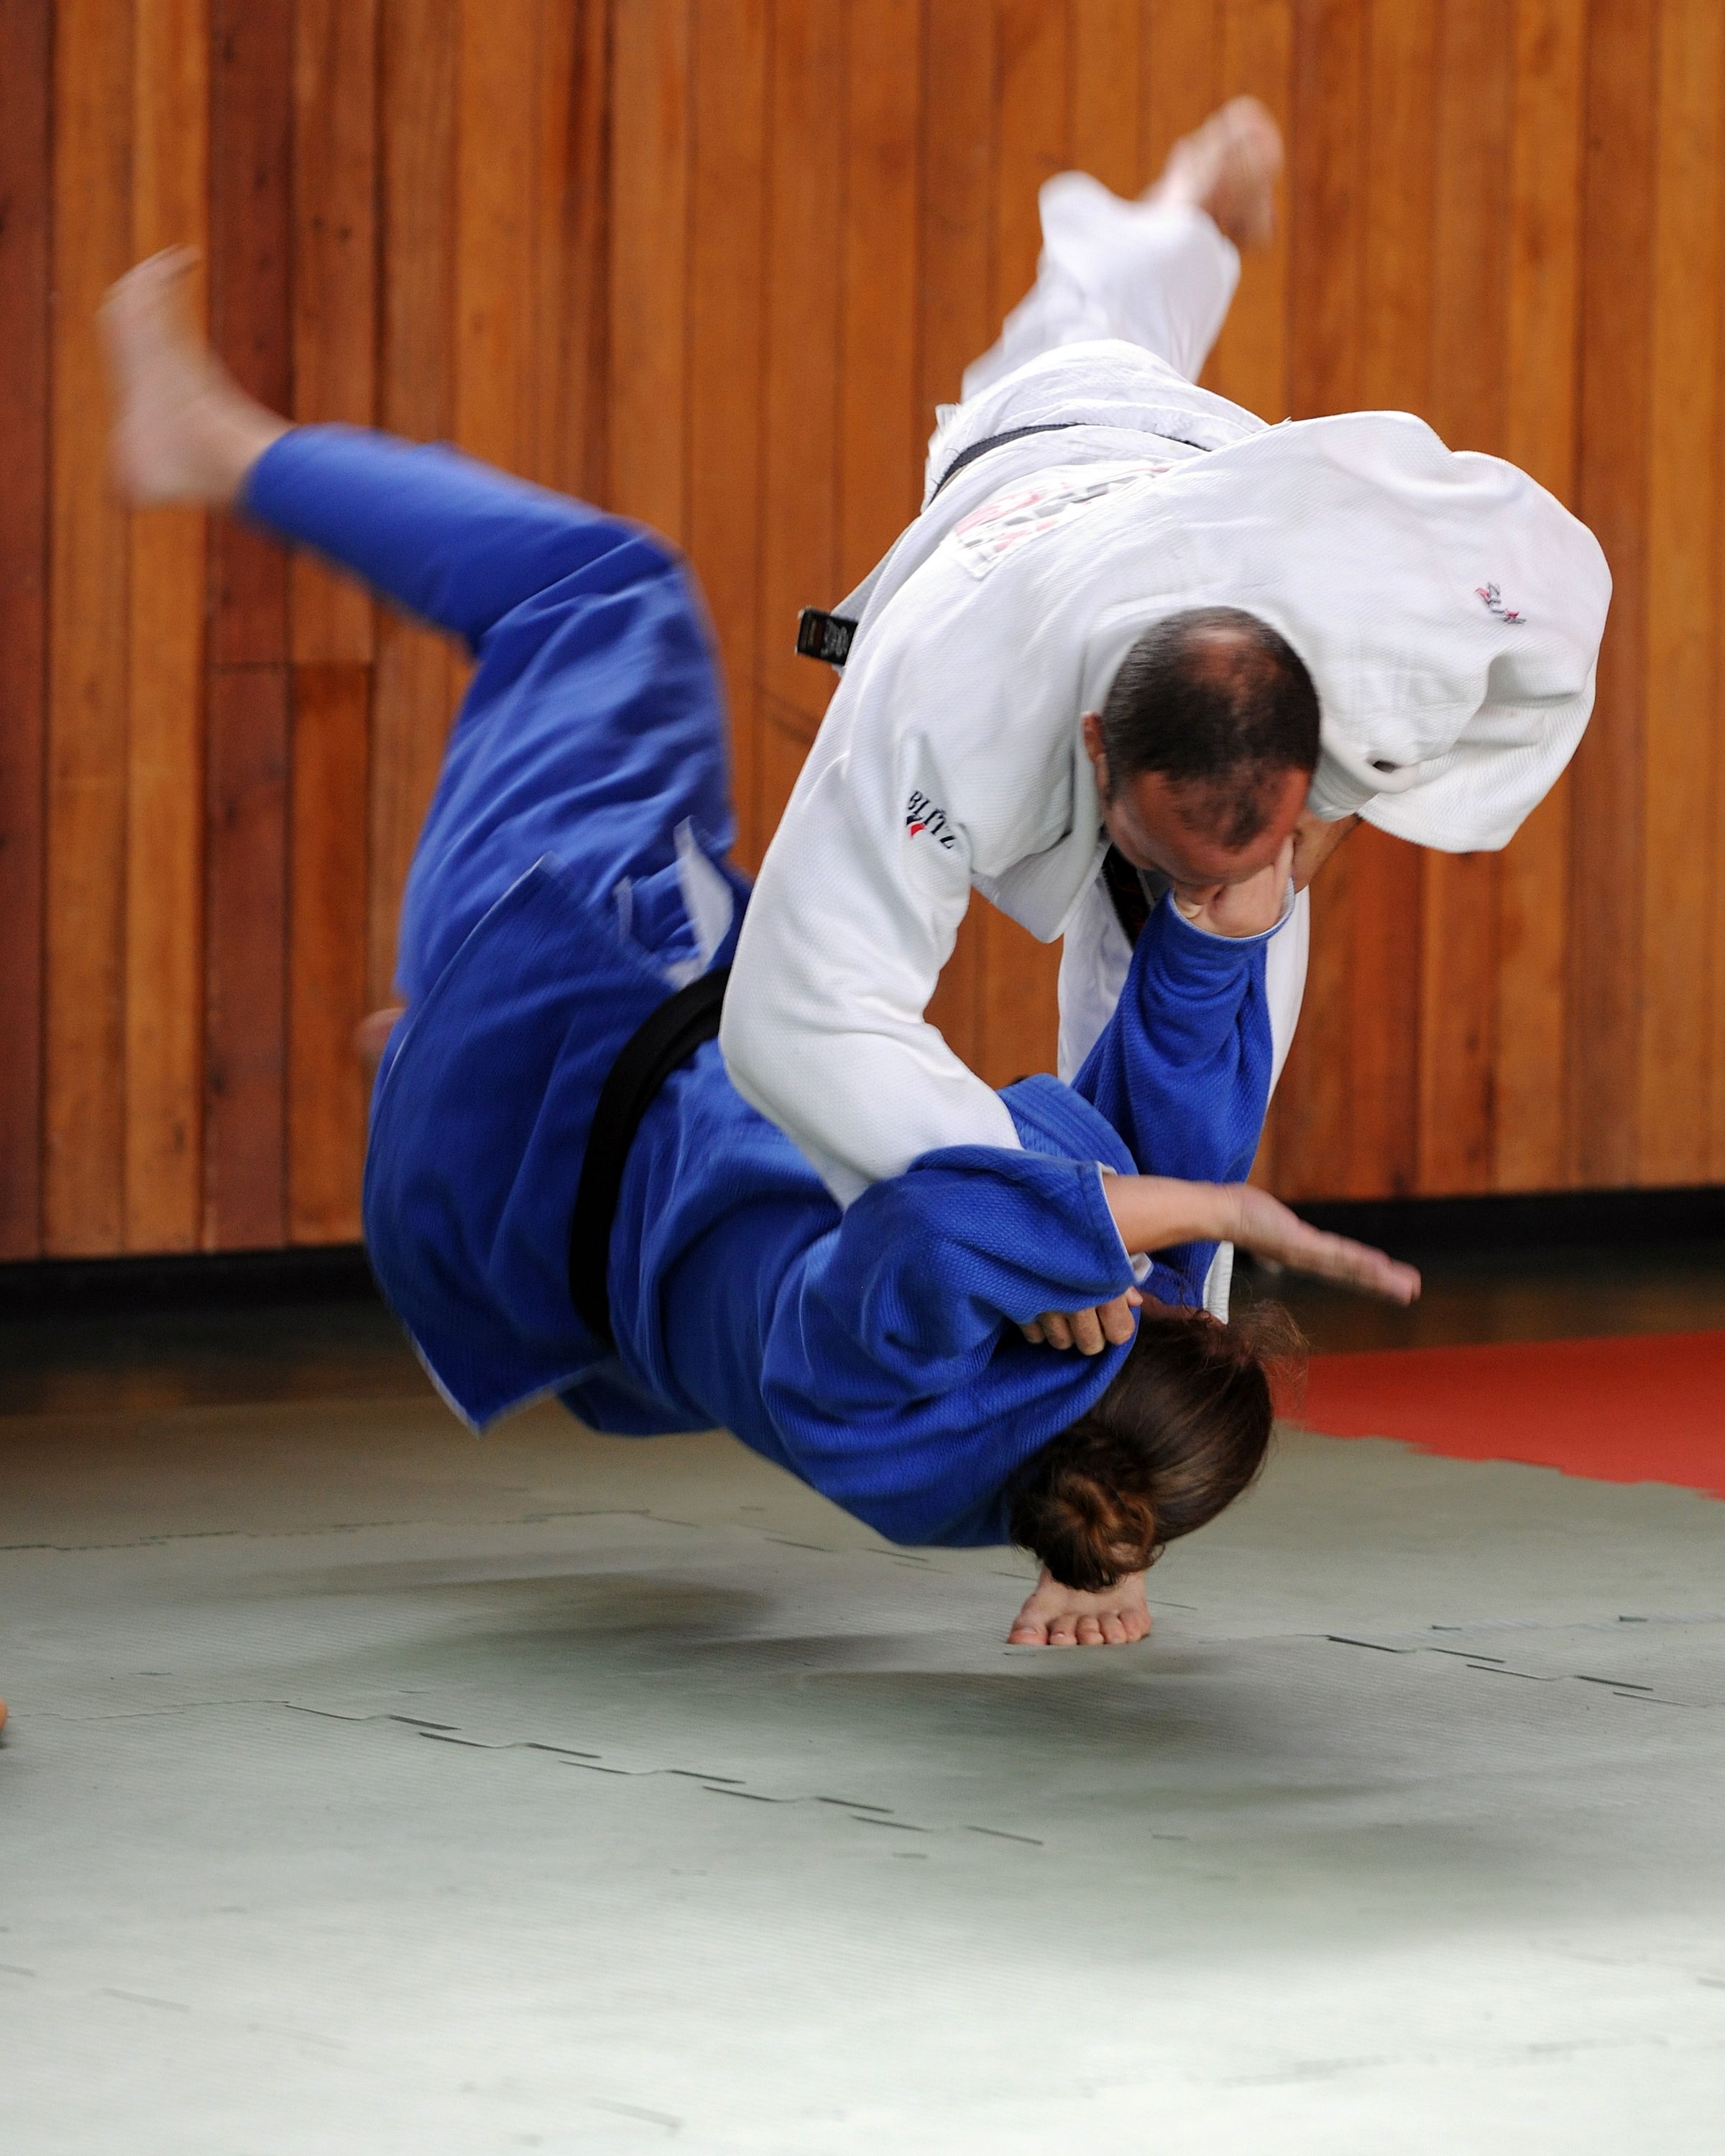 Combined Services Judo Team Training Camp Mod 45151758